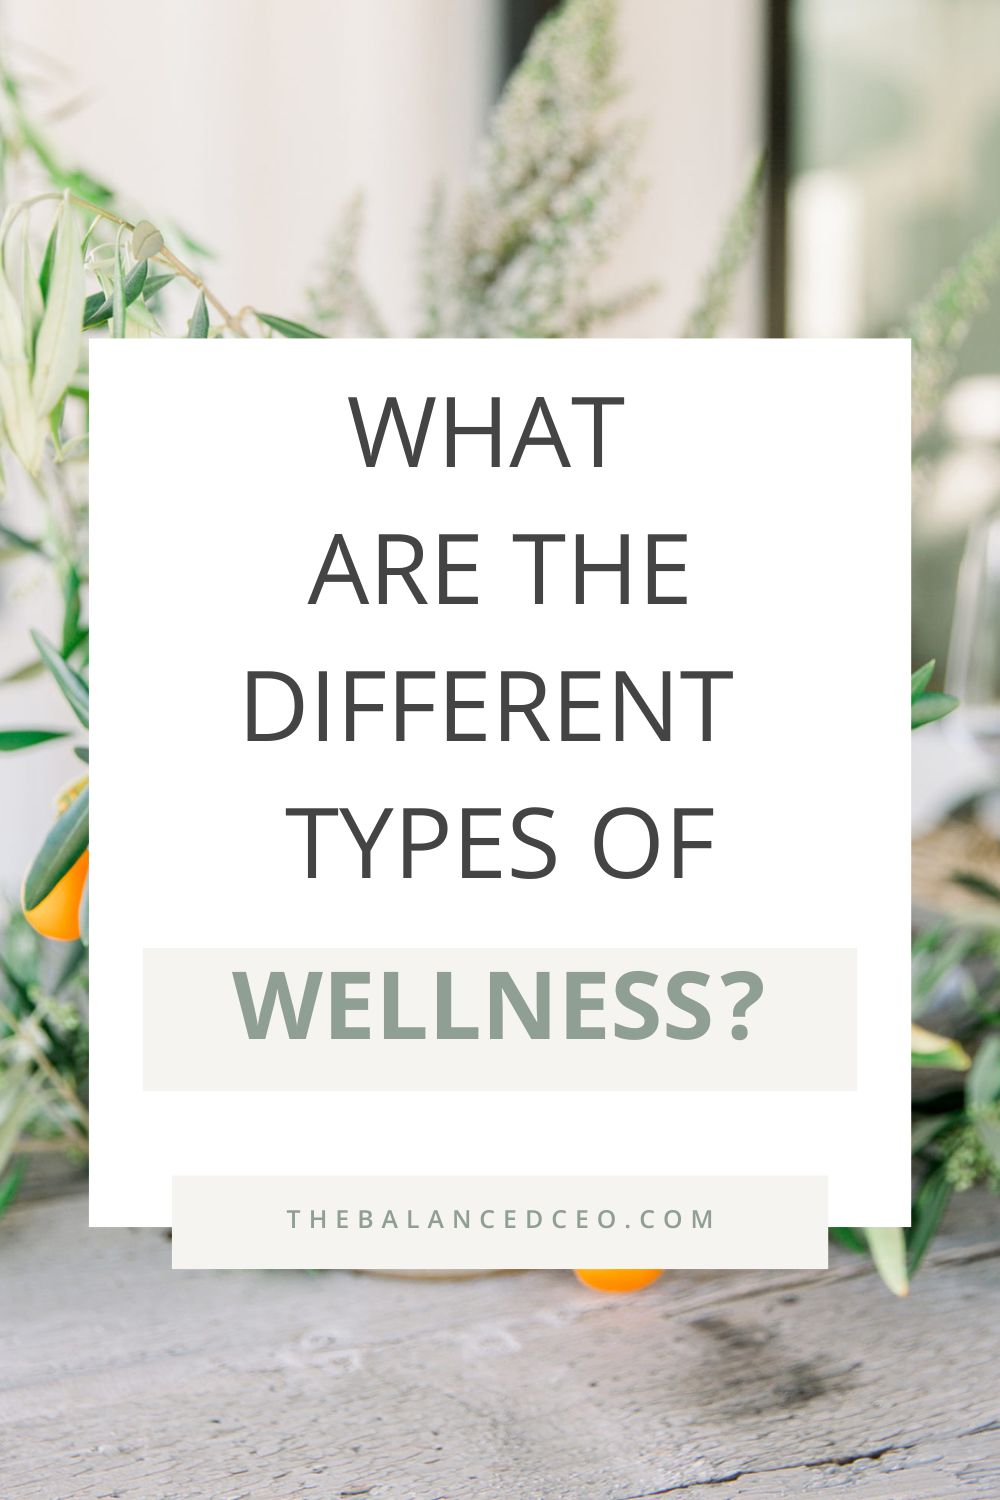 What Are the Different Types of Wellness?